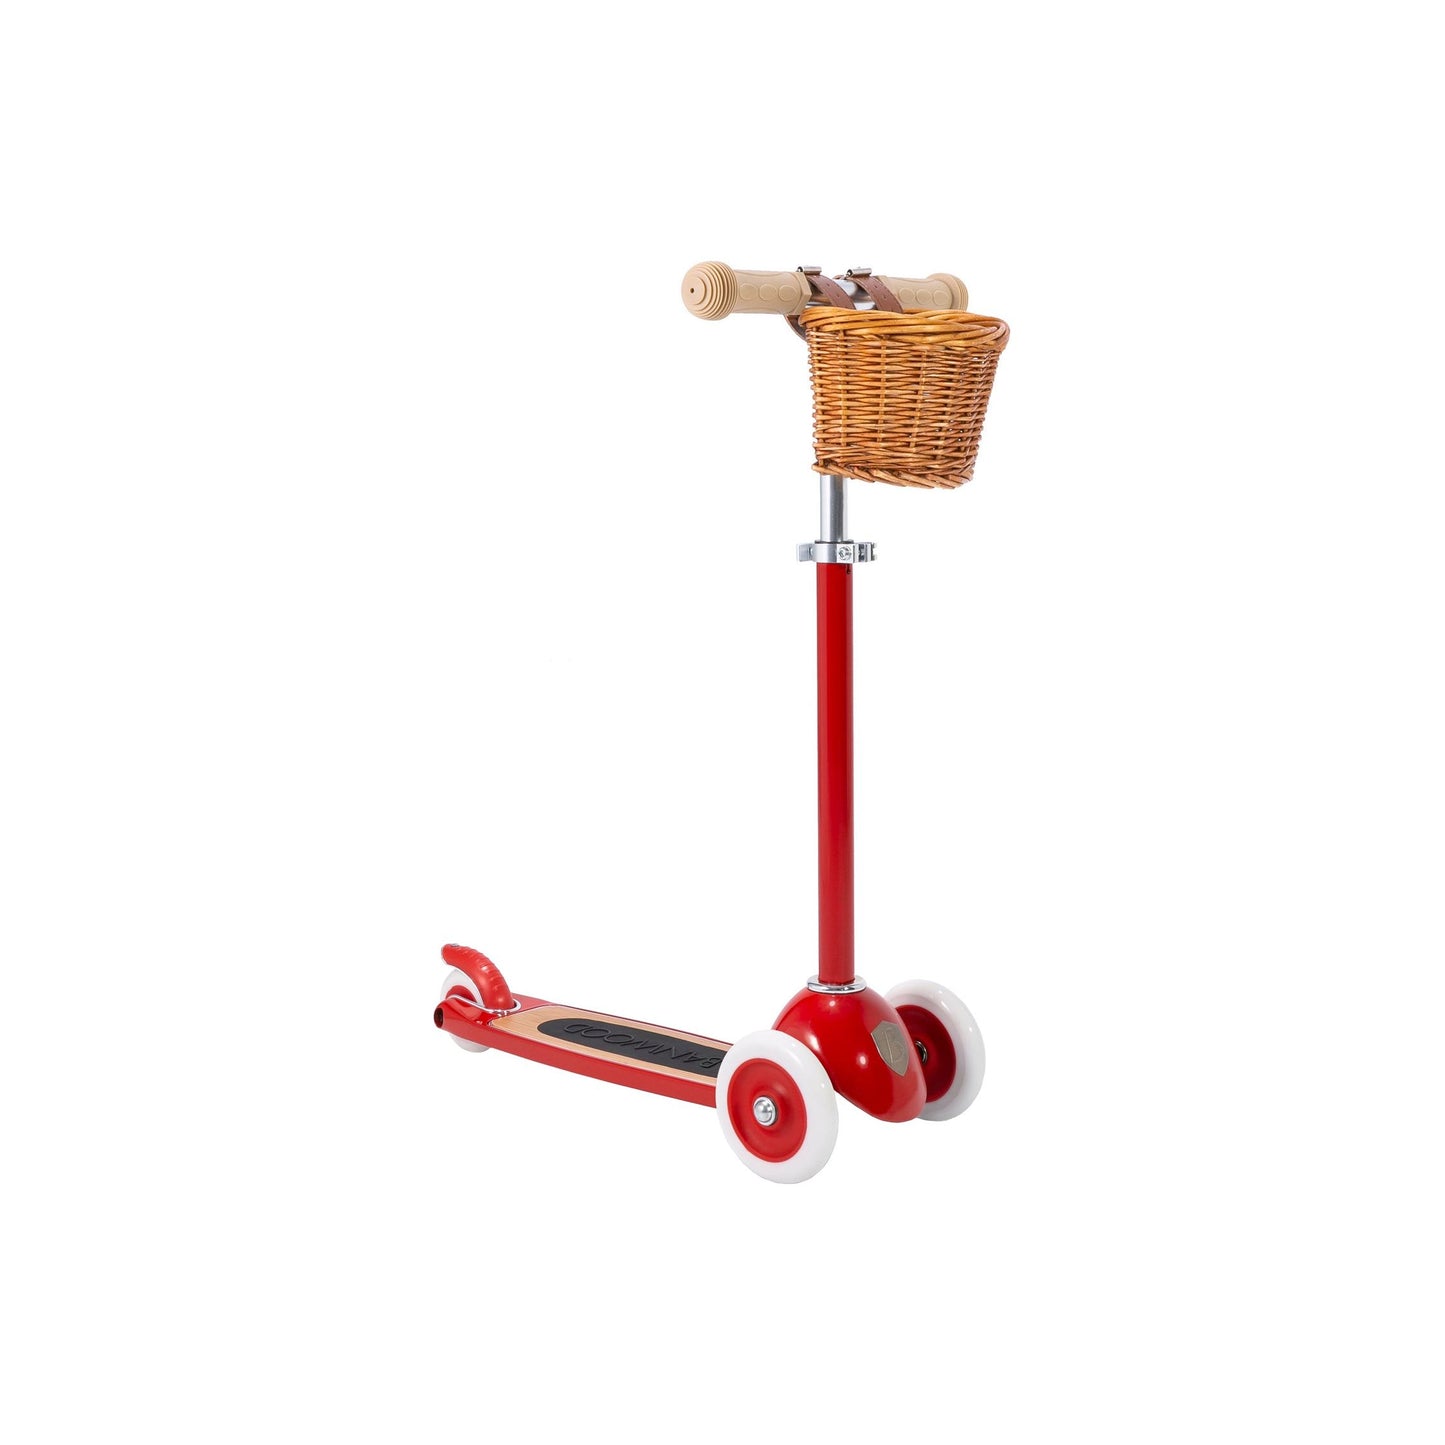 Banwood Scooter with Basket - Age 3+